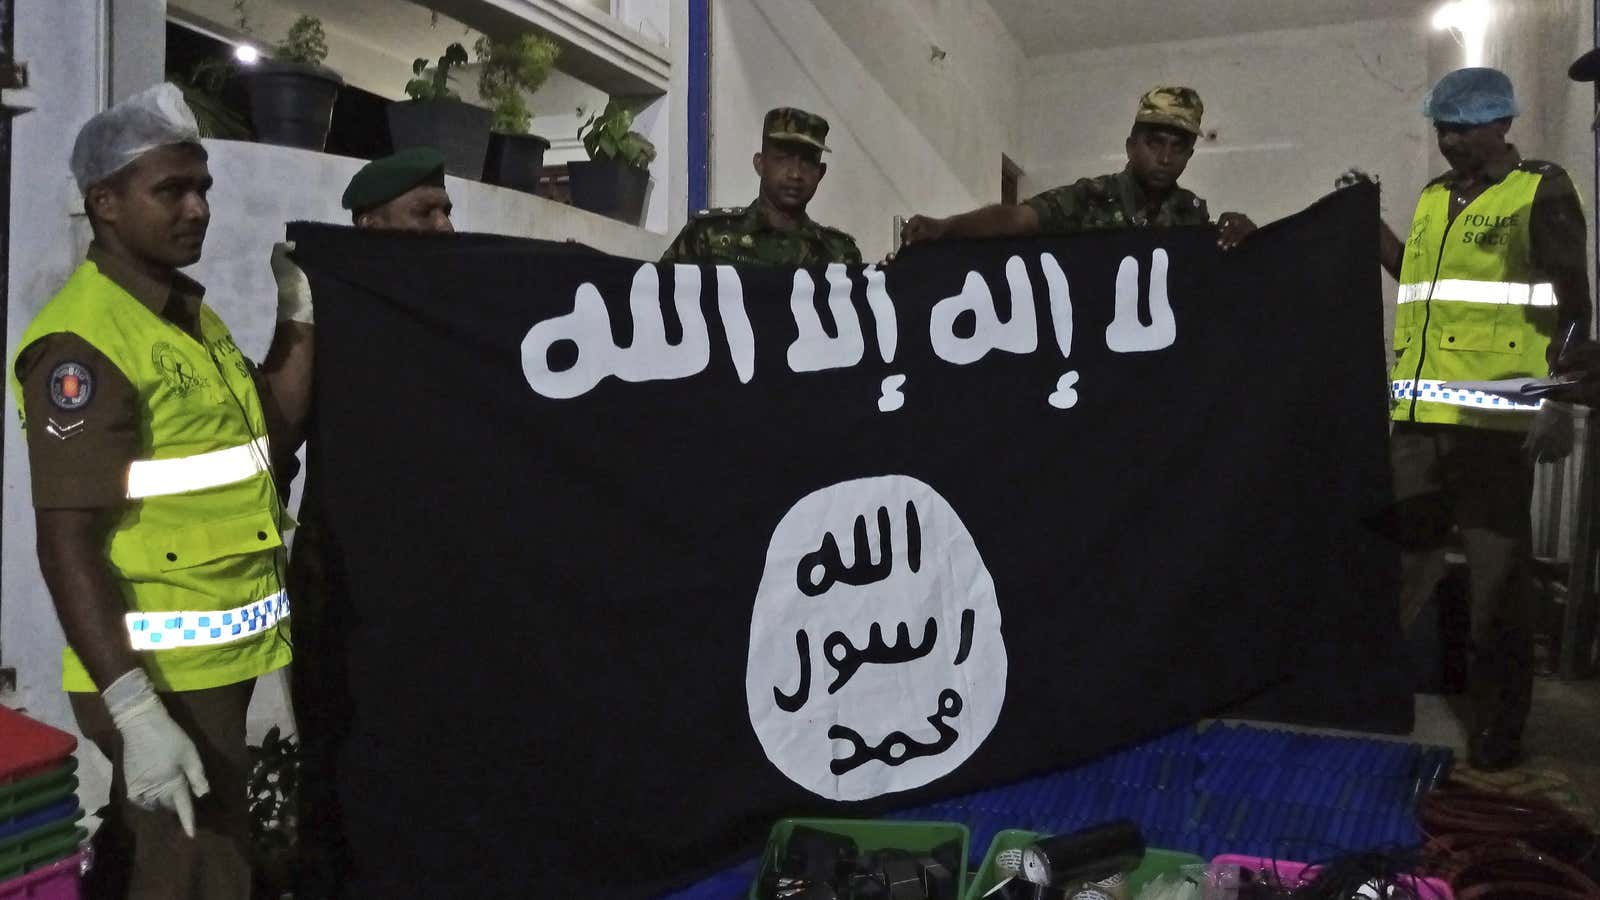 Sri Lankan police officers show an ISIS flag they recovered from militants in Sri Lanka.